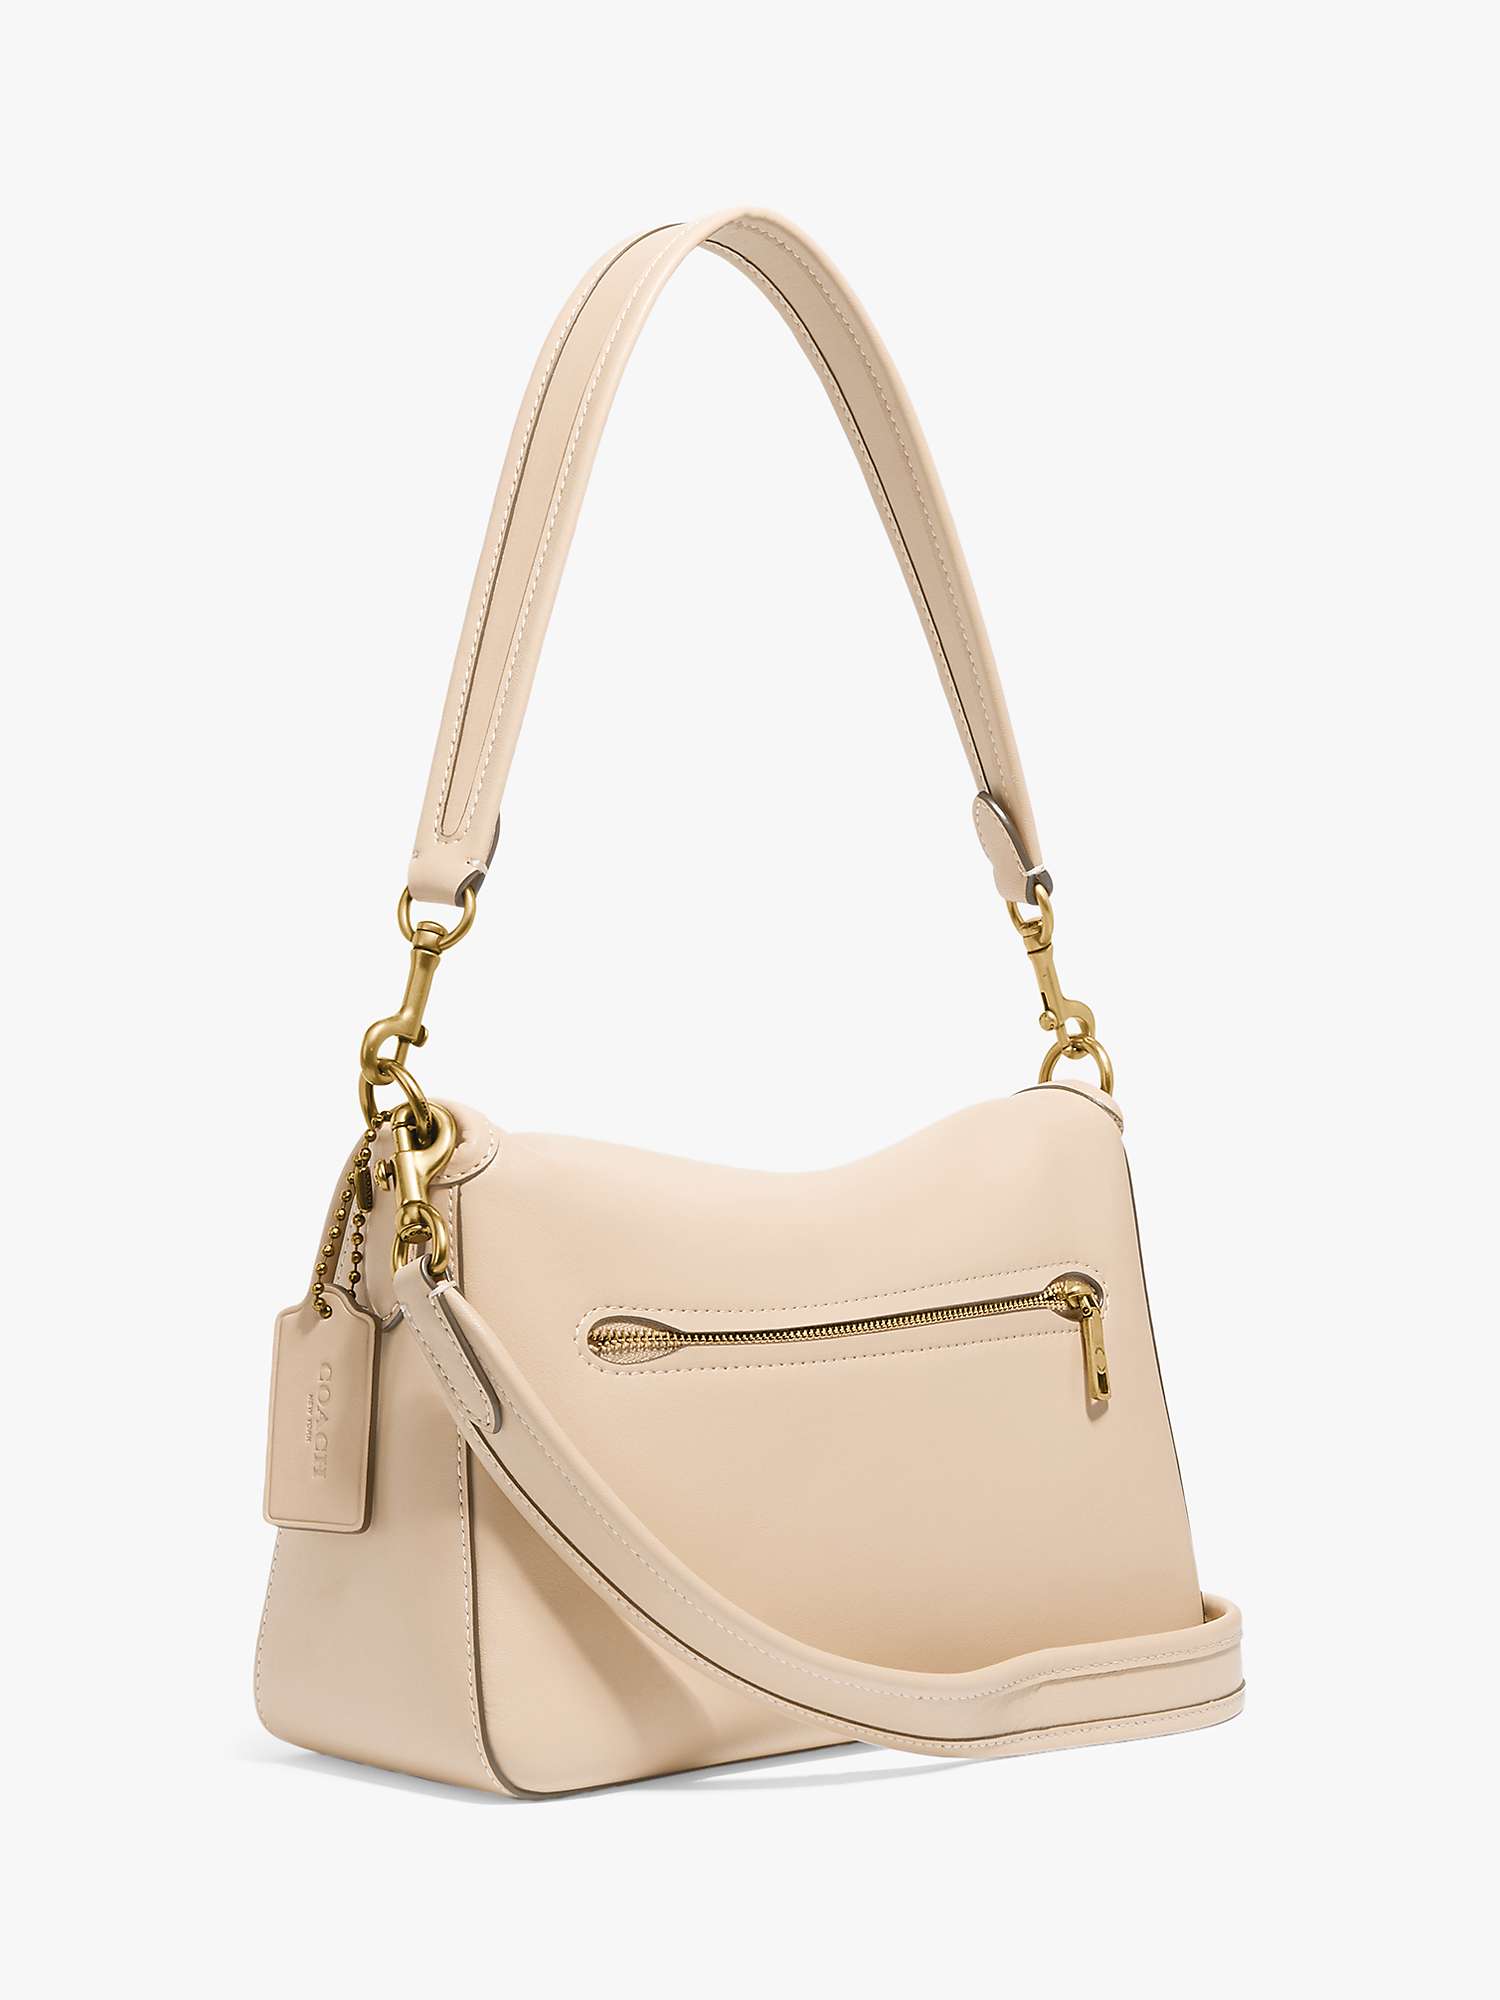 Coach Soft Tabby Leather Shoulder Bag, Ivory at John Lewis & Partners